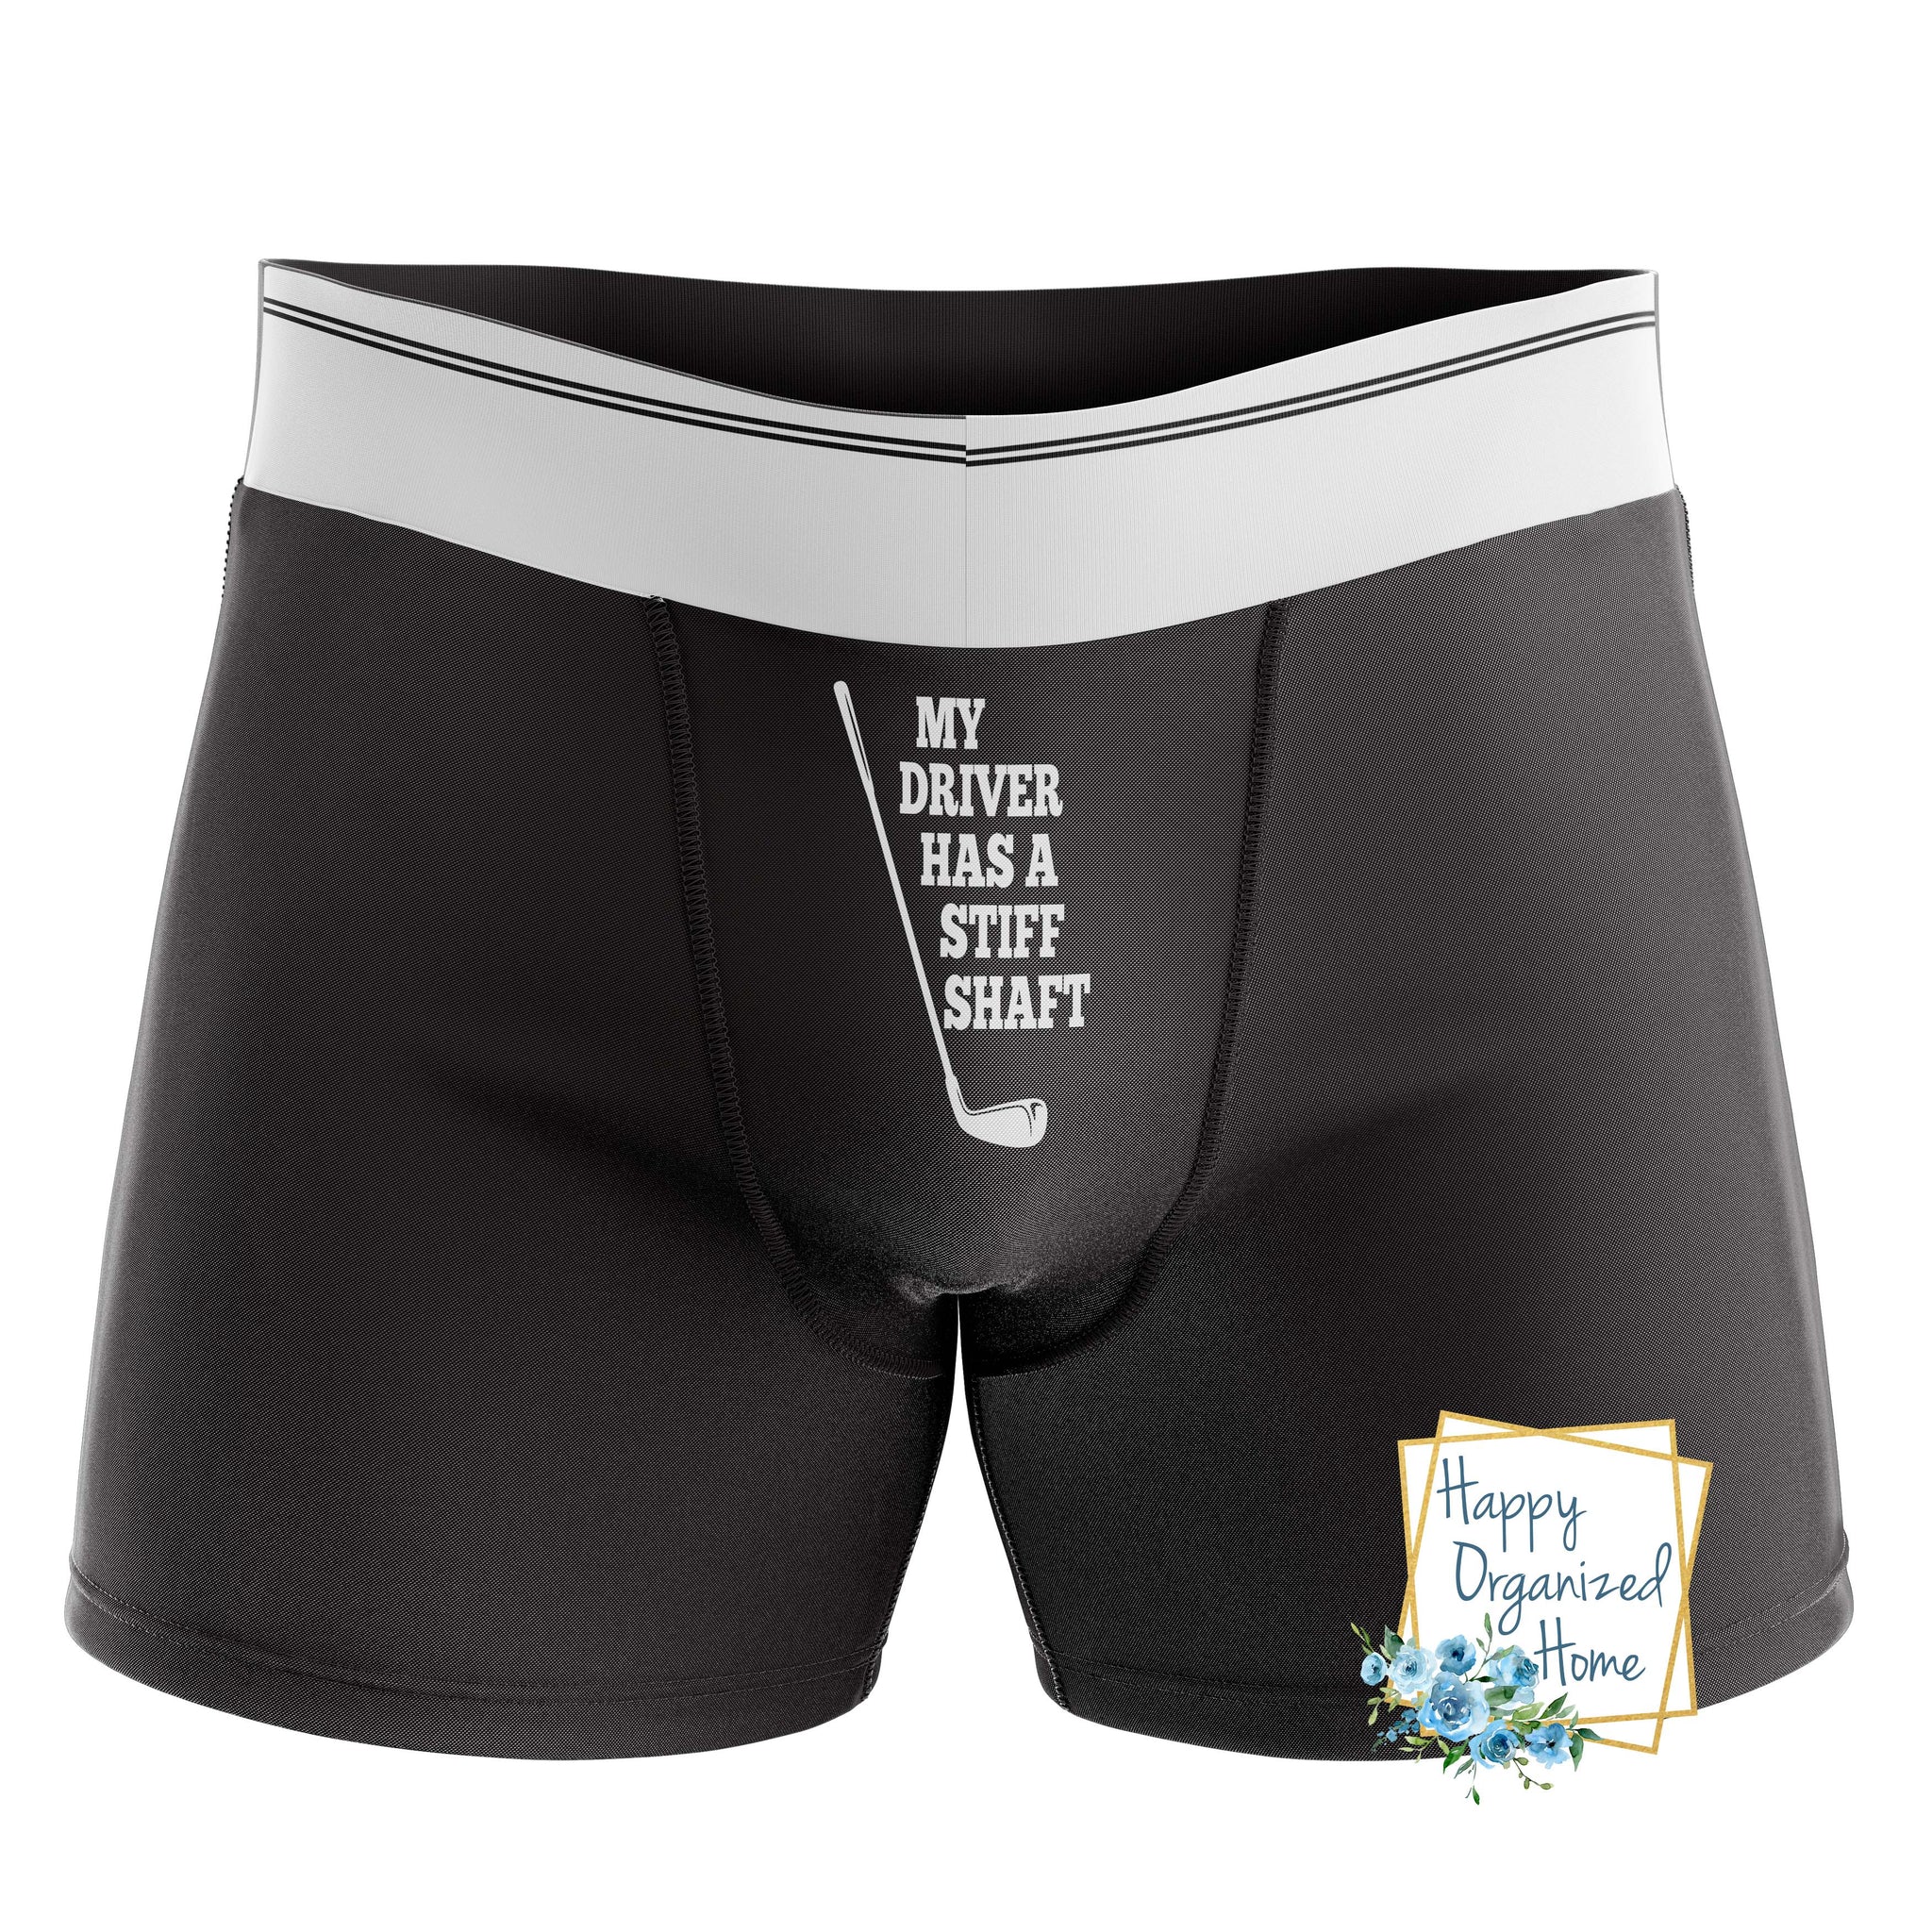 Golf Boxers - My Driver has a Stiff Shaft - Men's Naughty Boxer